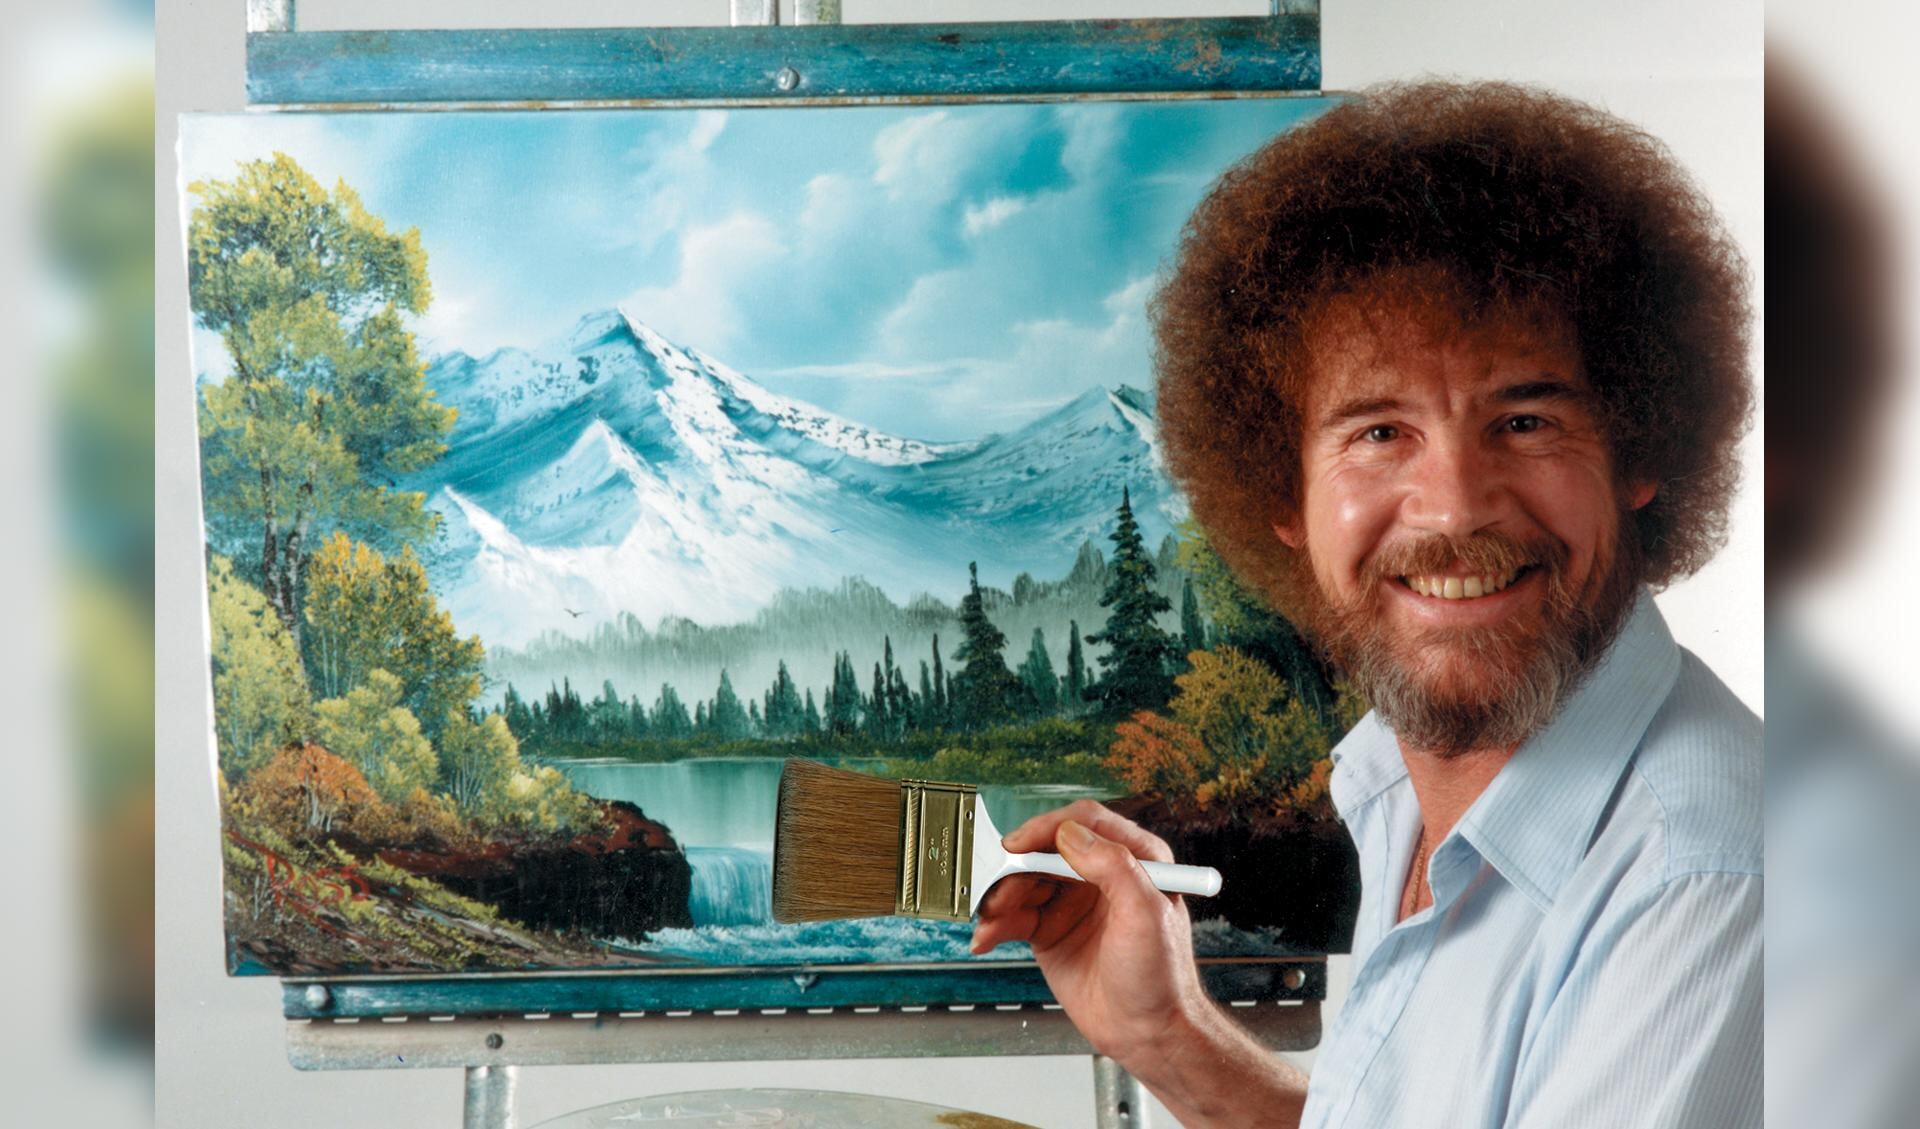 Bob Ross. ® Bob Ross name and images are registered trademarks of Bob Ross Inc. © Bob Ross Inc. Used with permission.